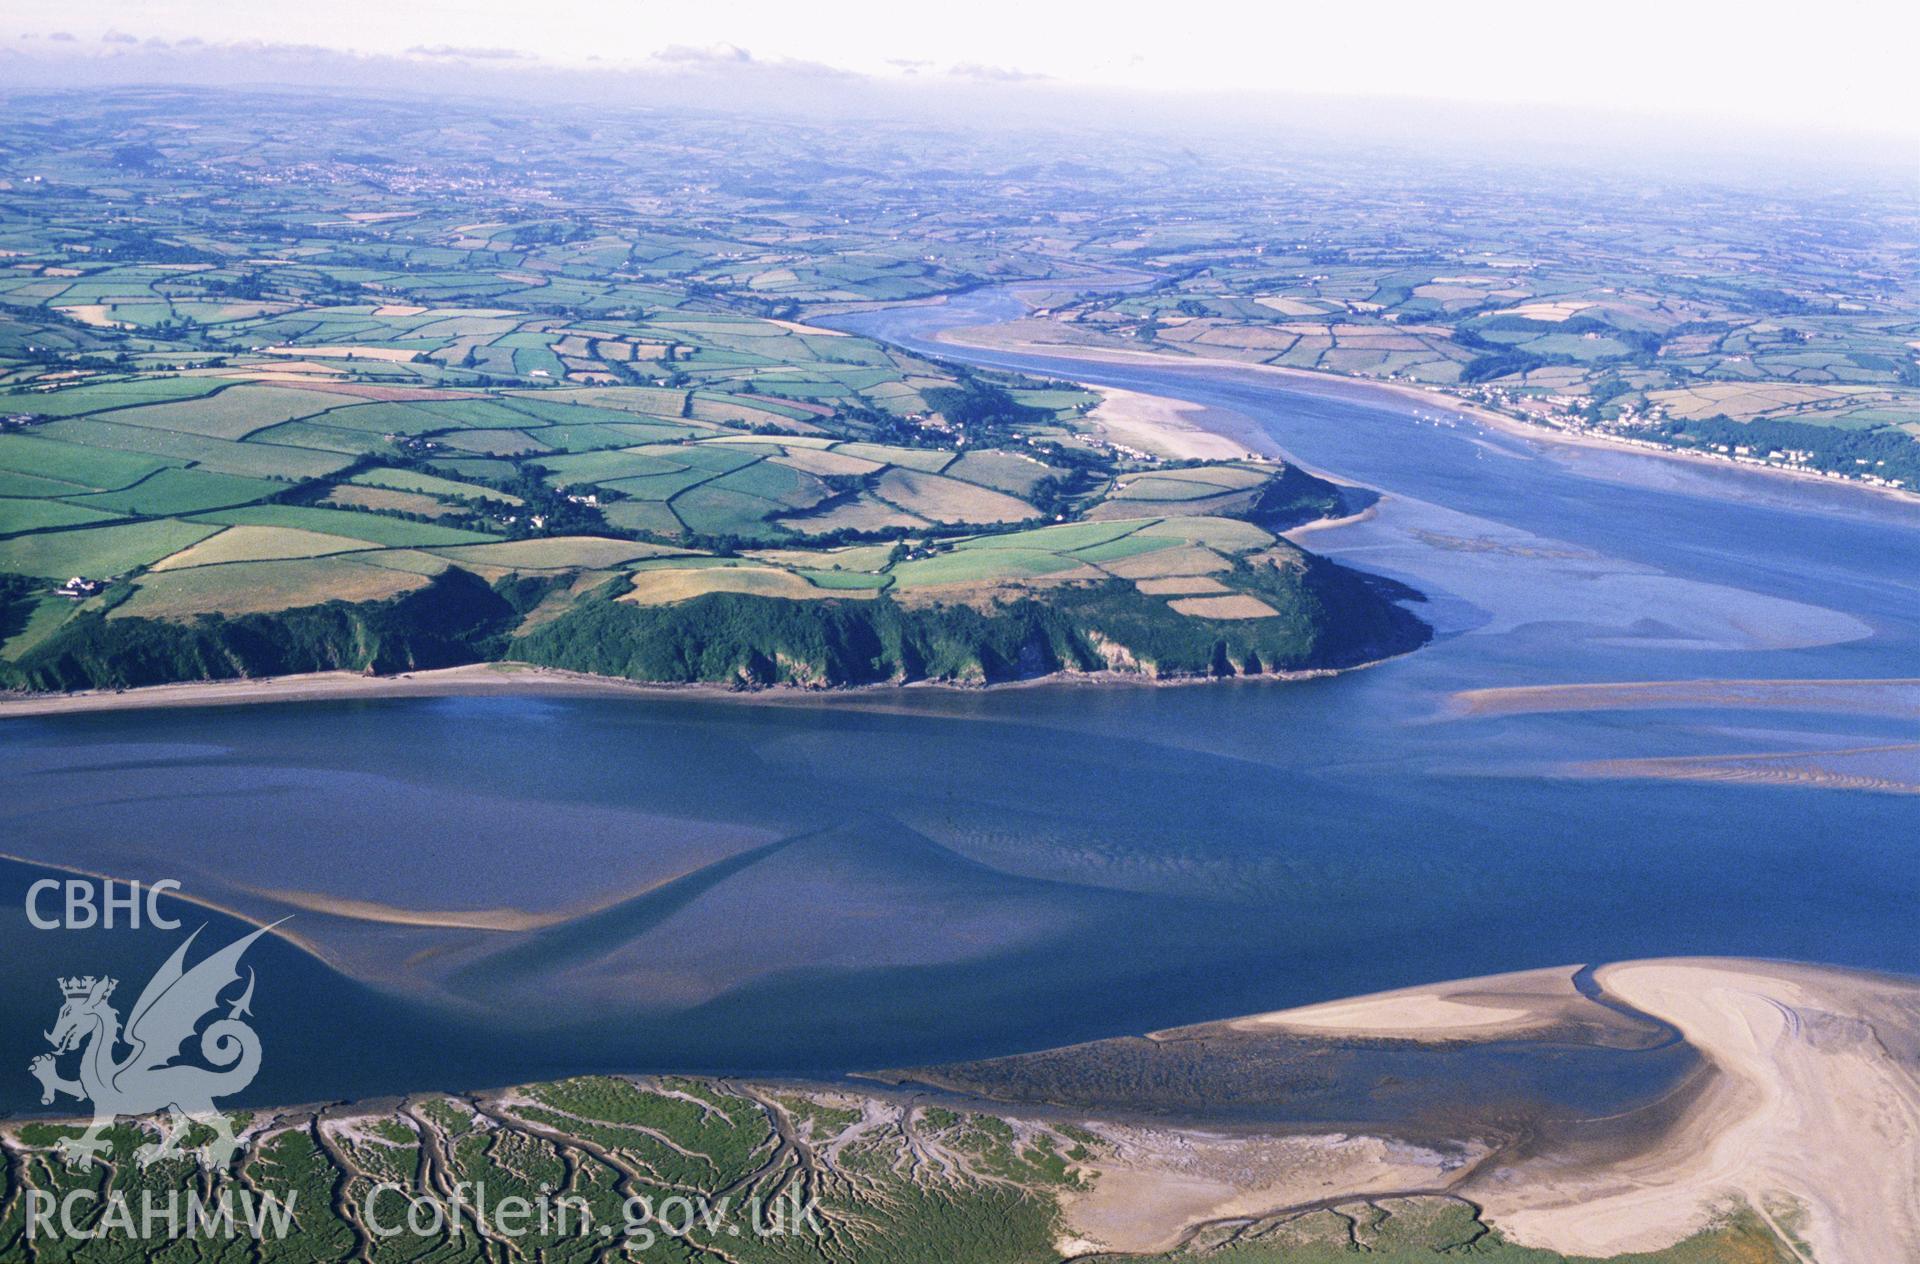 Slide of RCAHMW colour oblique aerial photograph of Towy Estuary, taken by C.R. Musson, 14/7/1989.